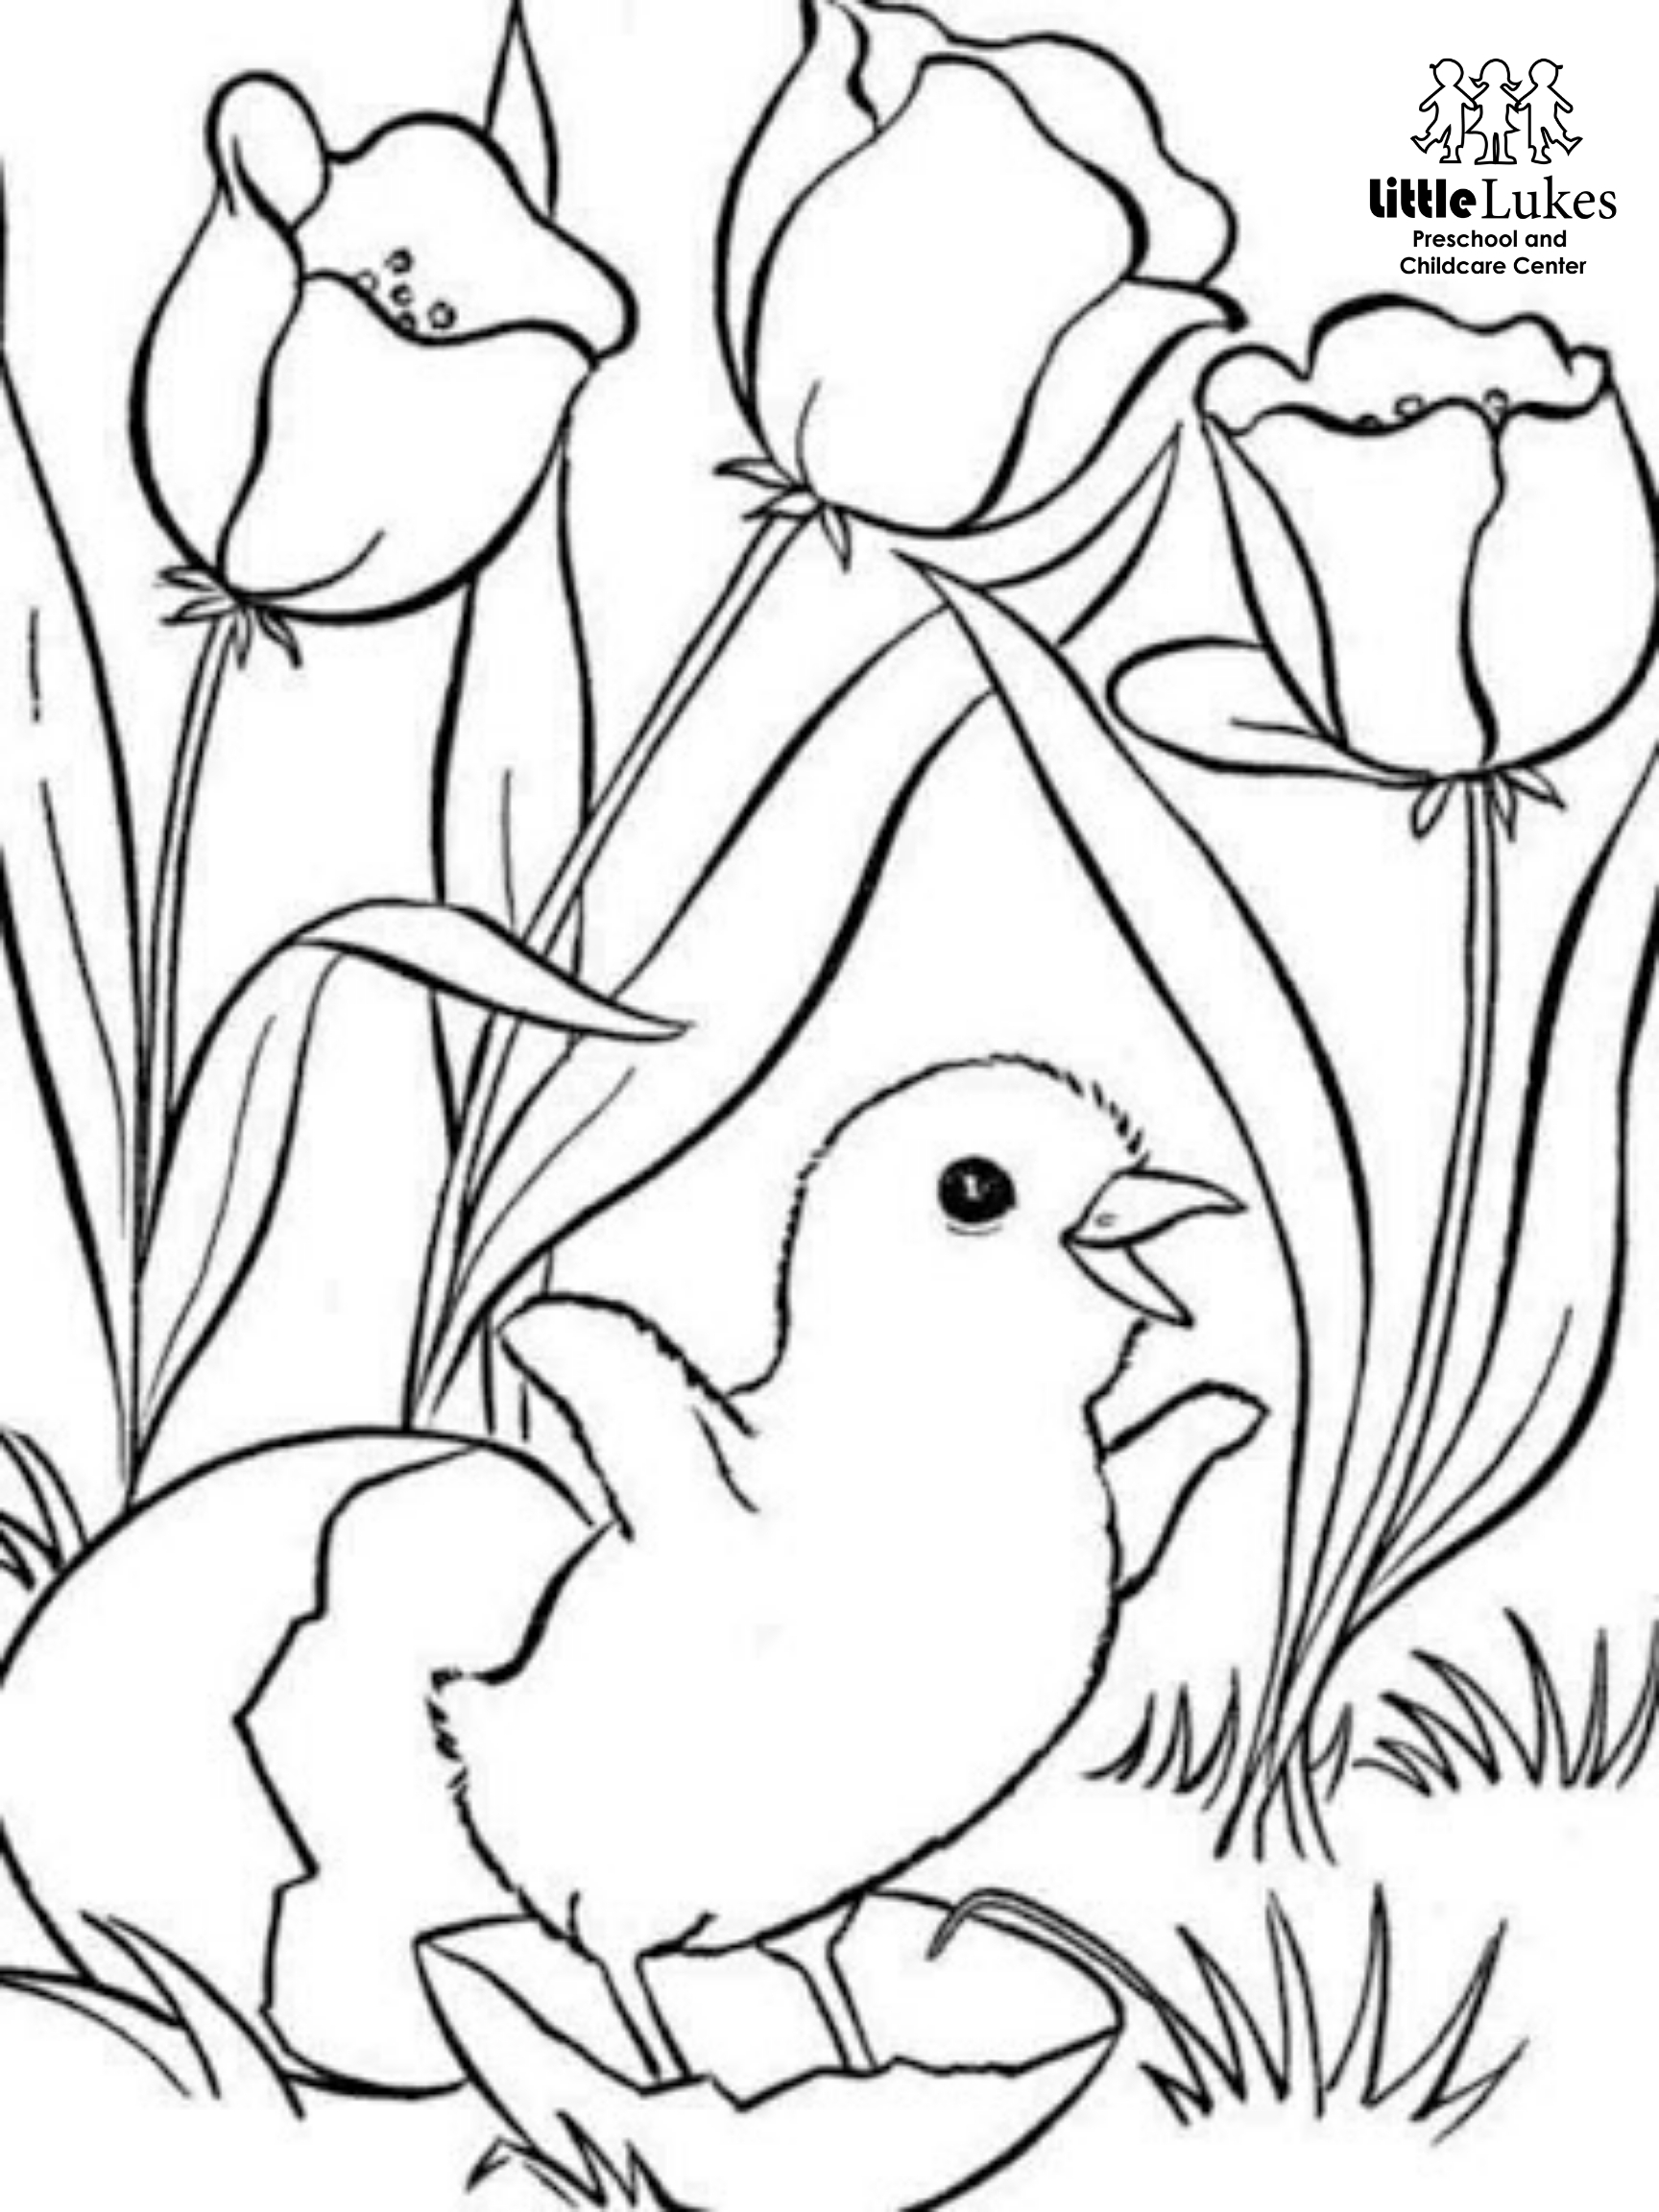 Bird and Flowers Coloring Page